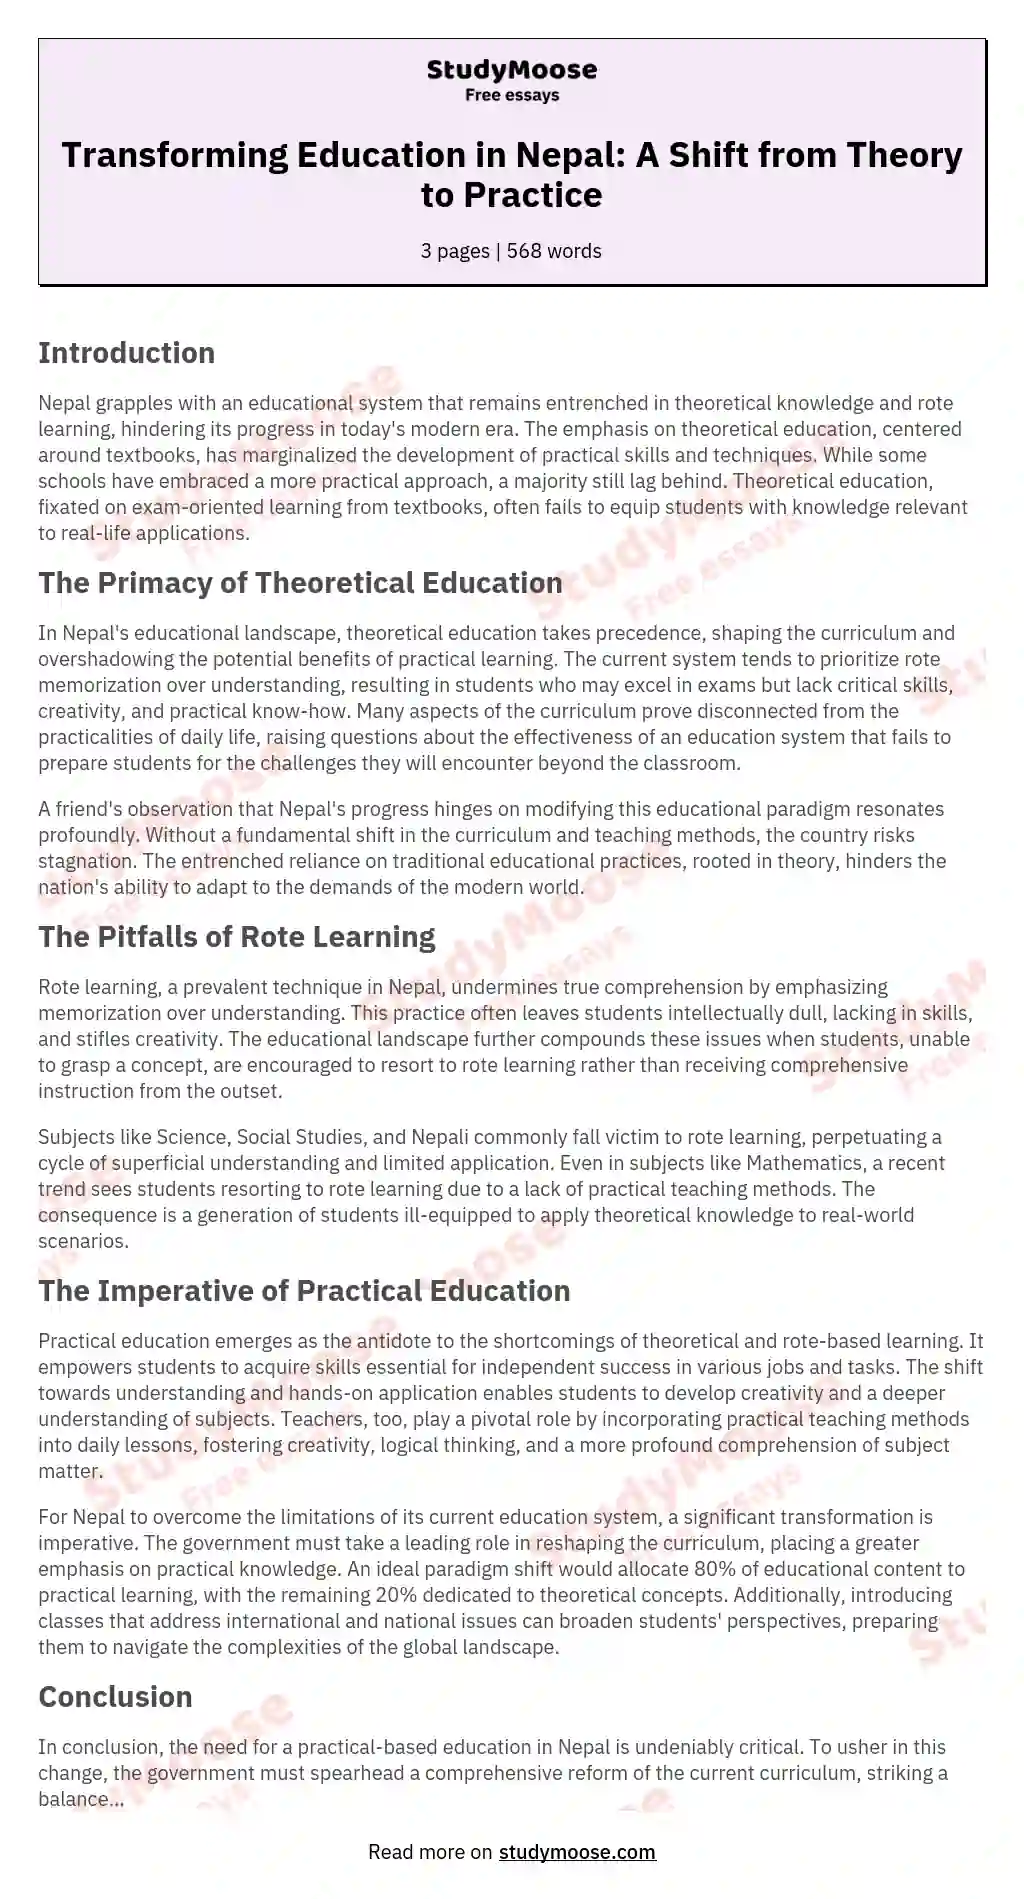 Transforming Education in Nepal: A Shift from Theory to Practice essay